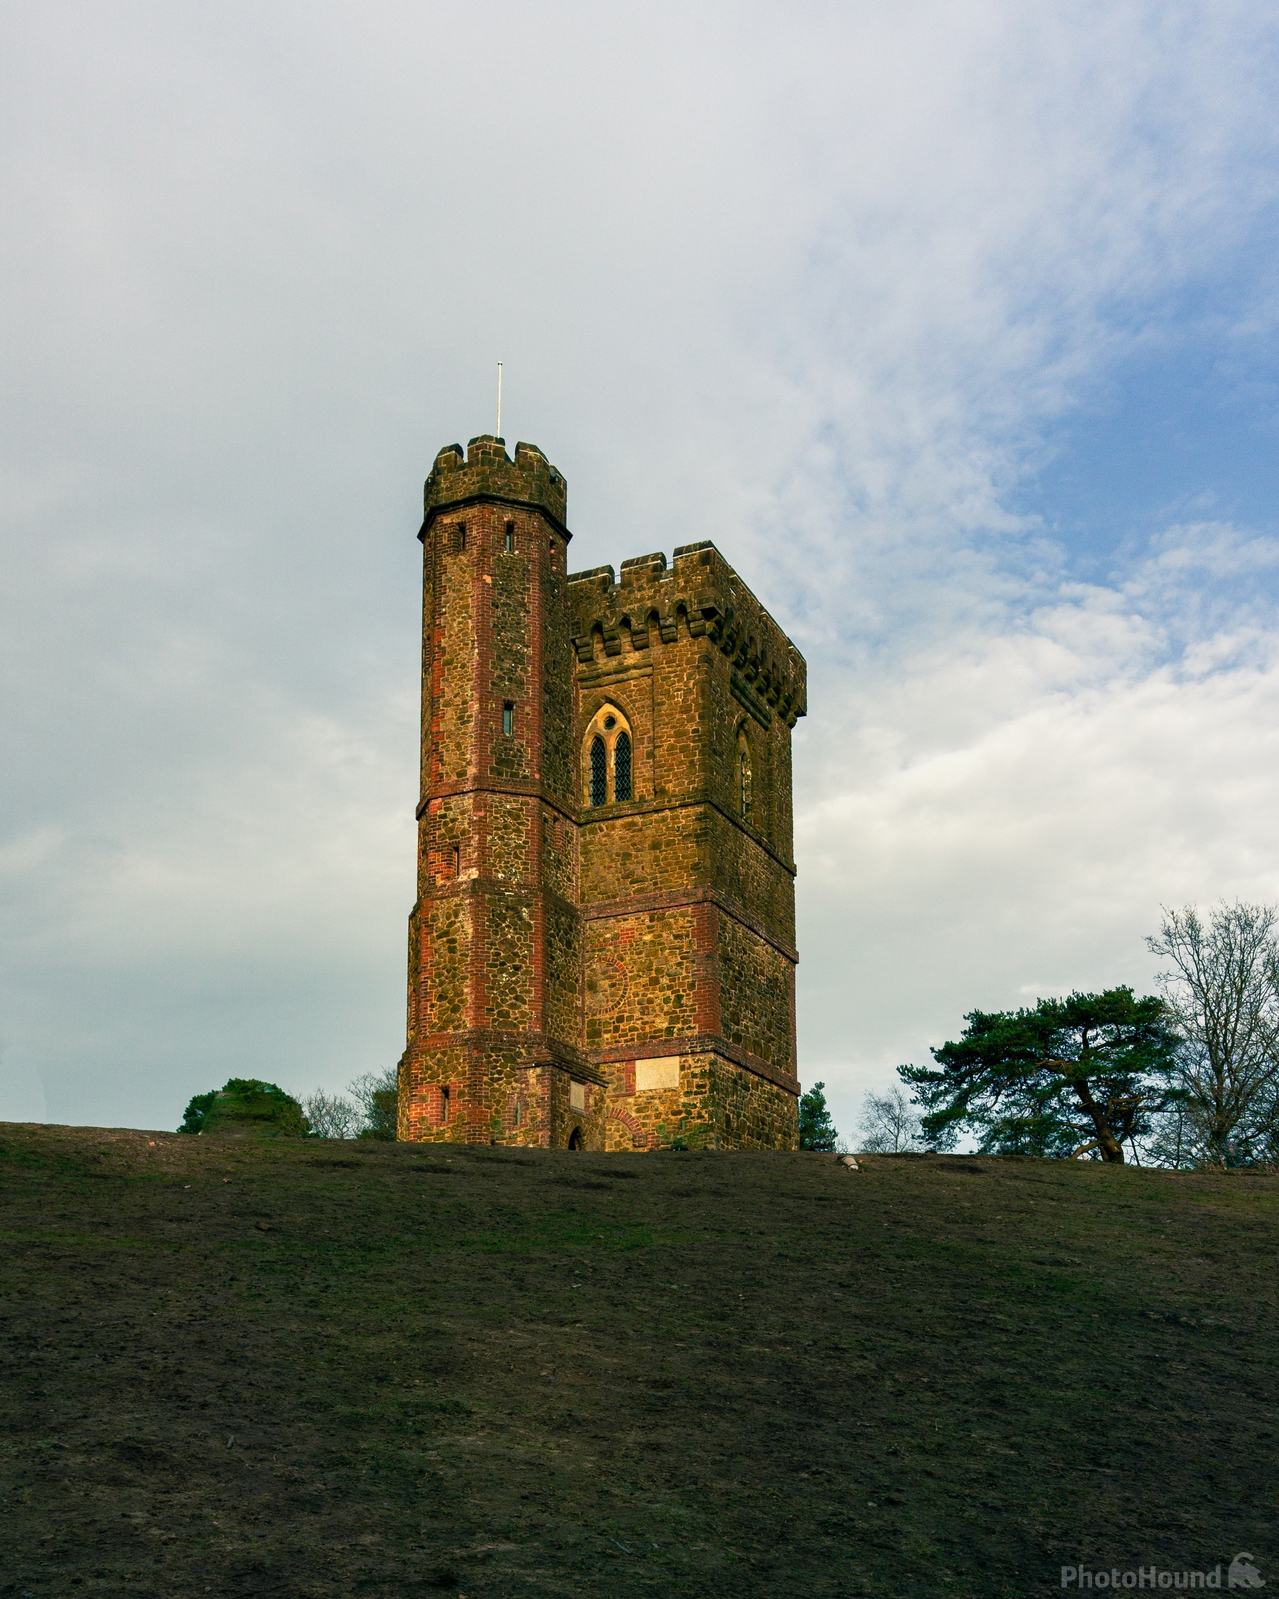 Image of Leith hill tower by Jathu Thillai